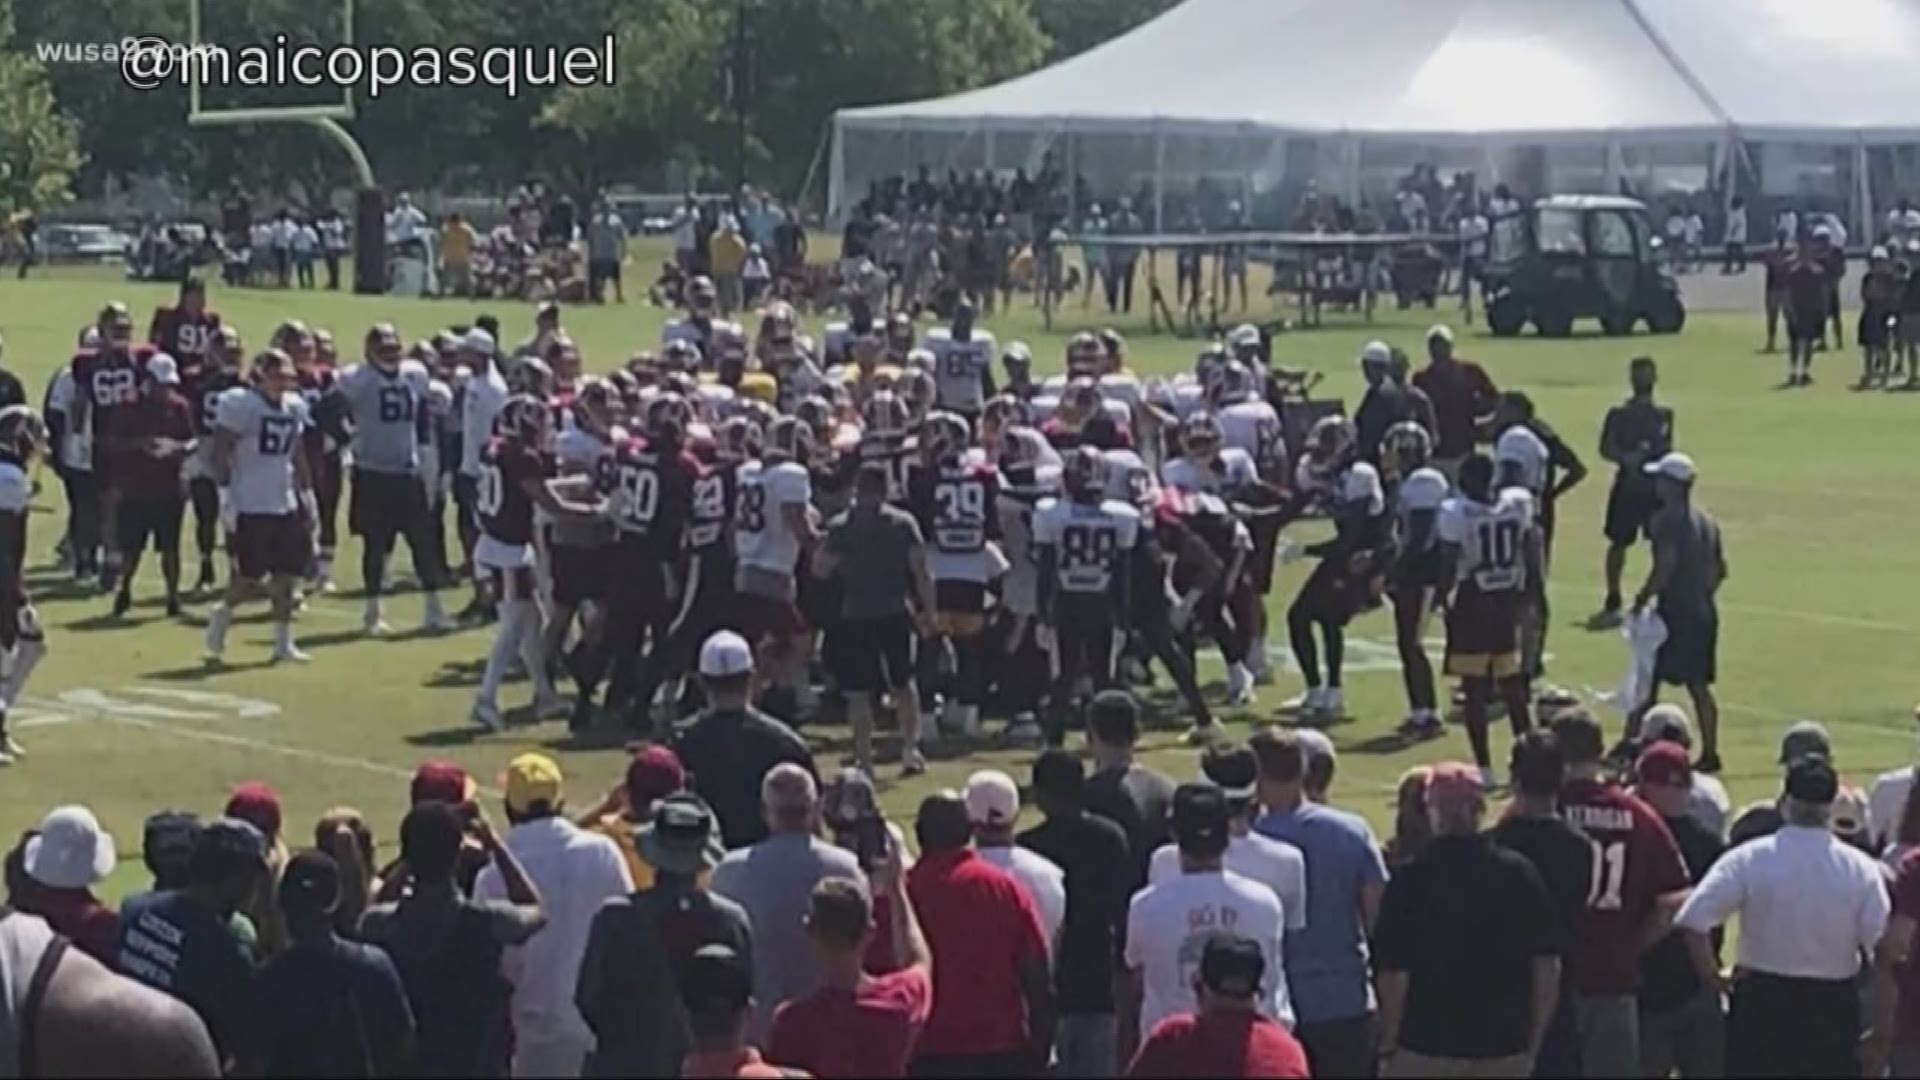 There was not 1, but 2 fights during practice at Redskins training camp.